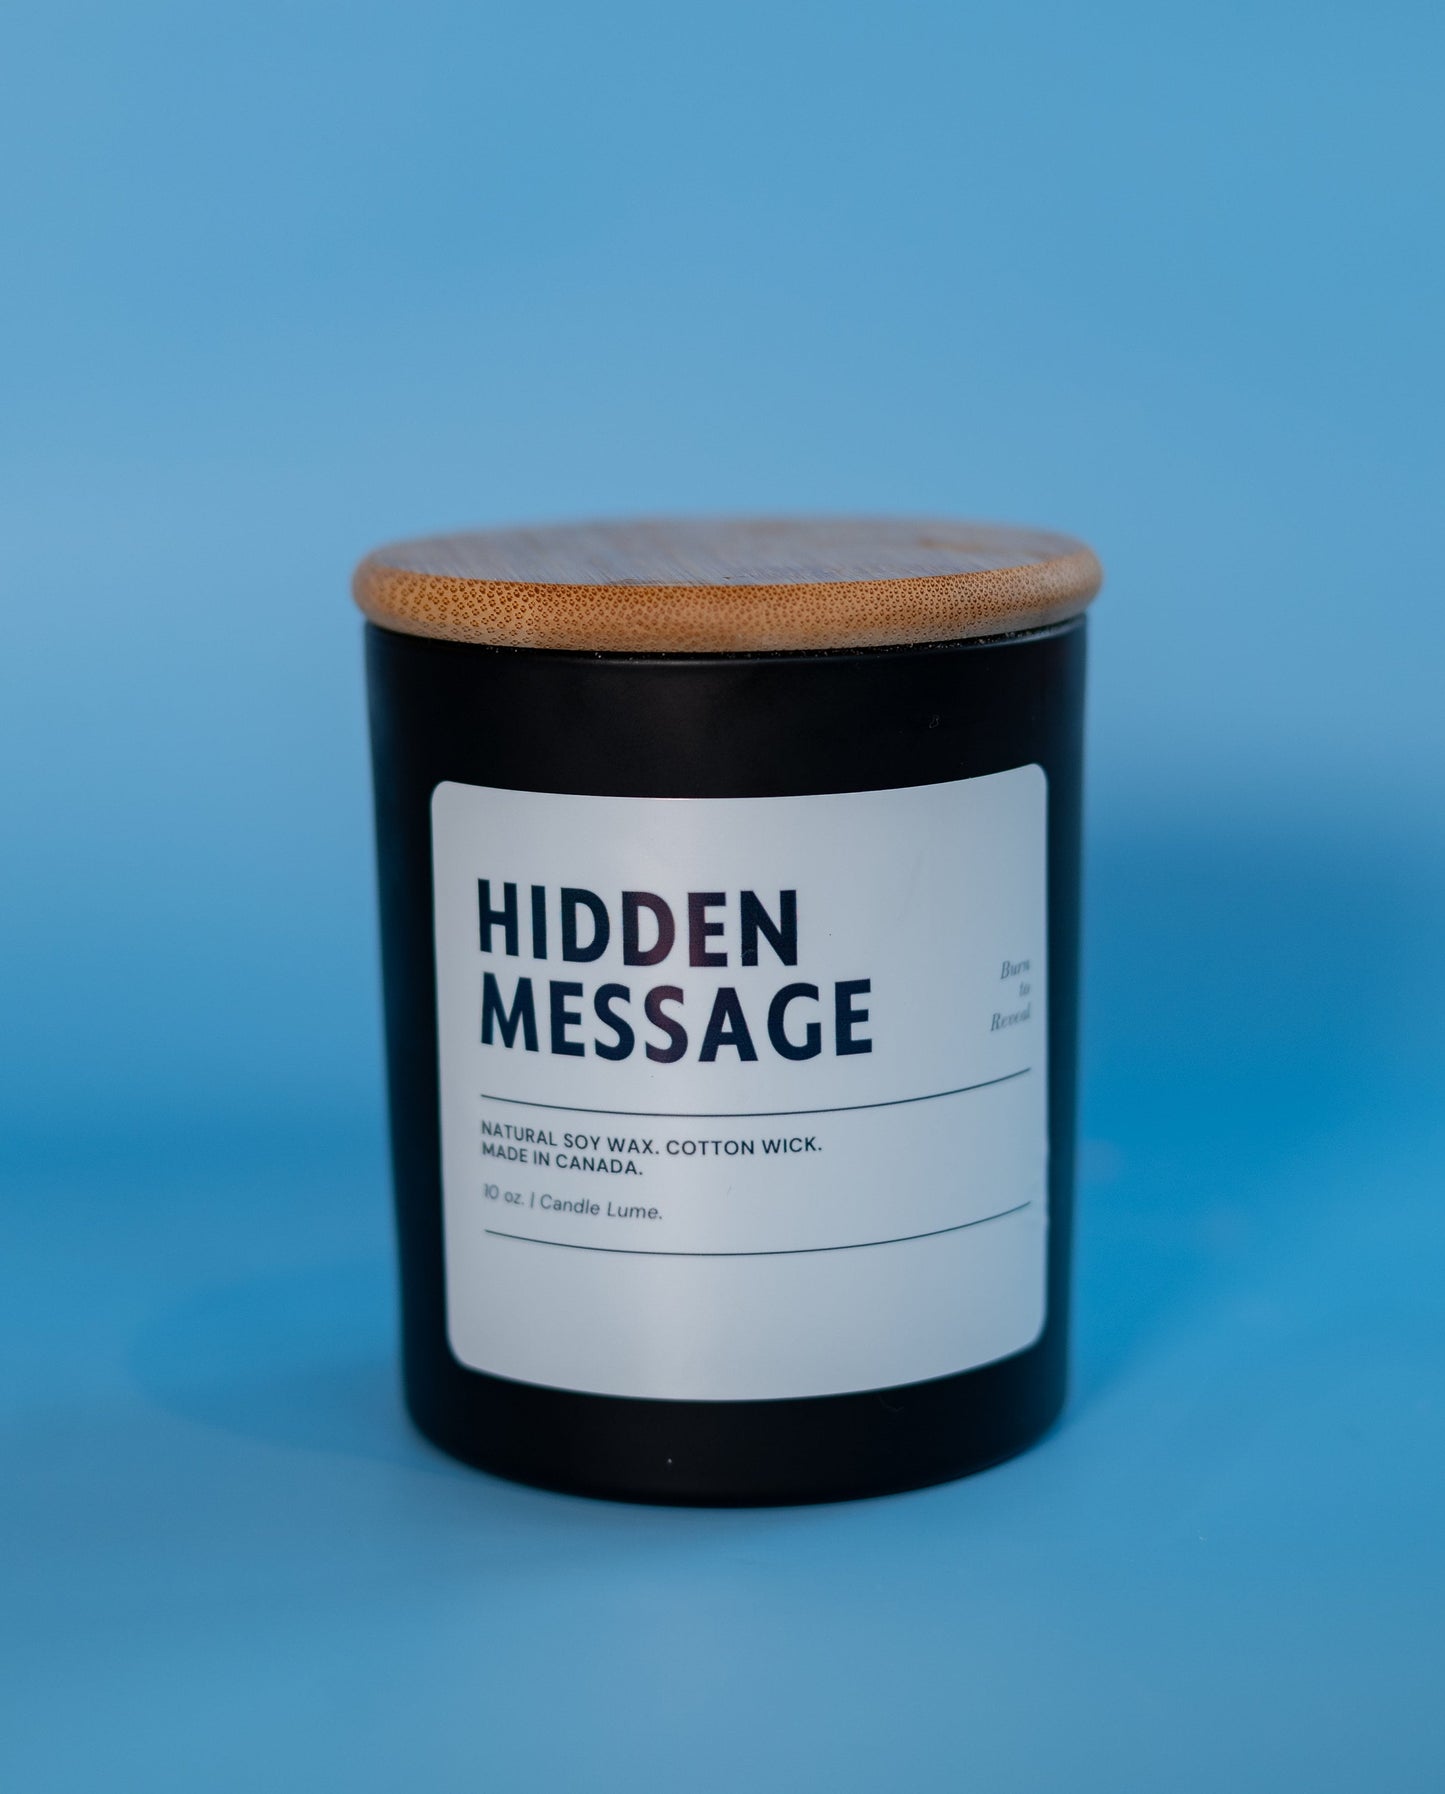 Hidden Message Candle / Secret Message Candle / Gift Ideas / Christmas Gift Ideas / Jar Candle / Container Candle / Custom Scents